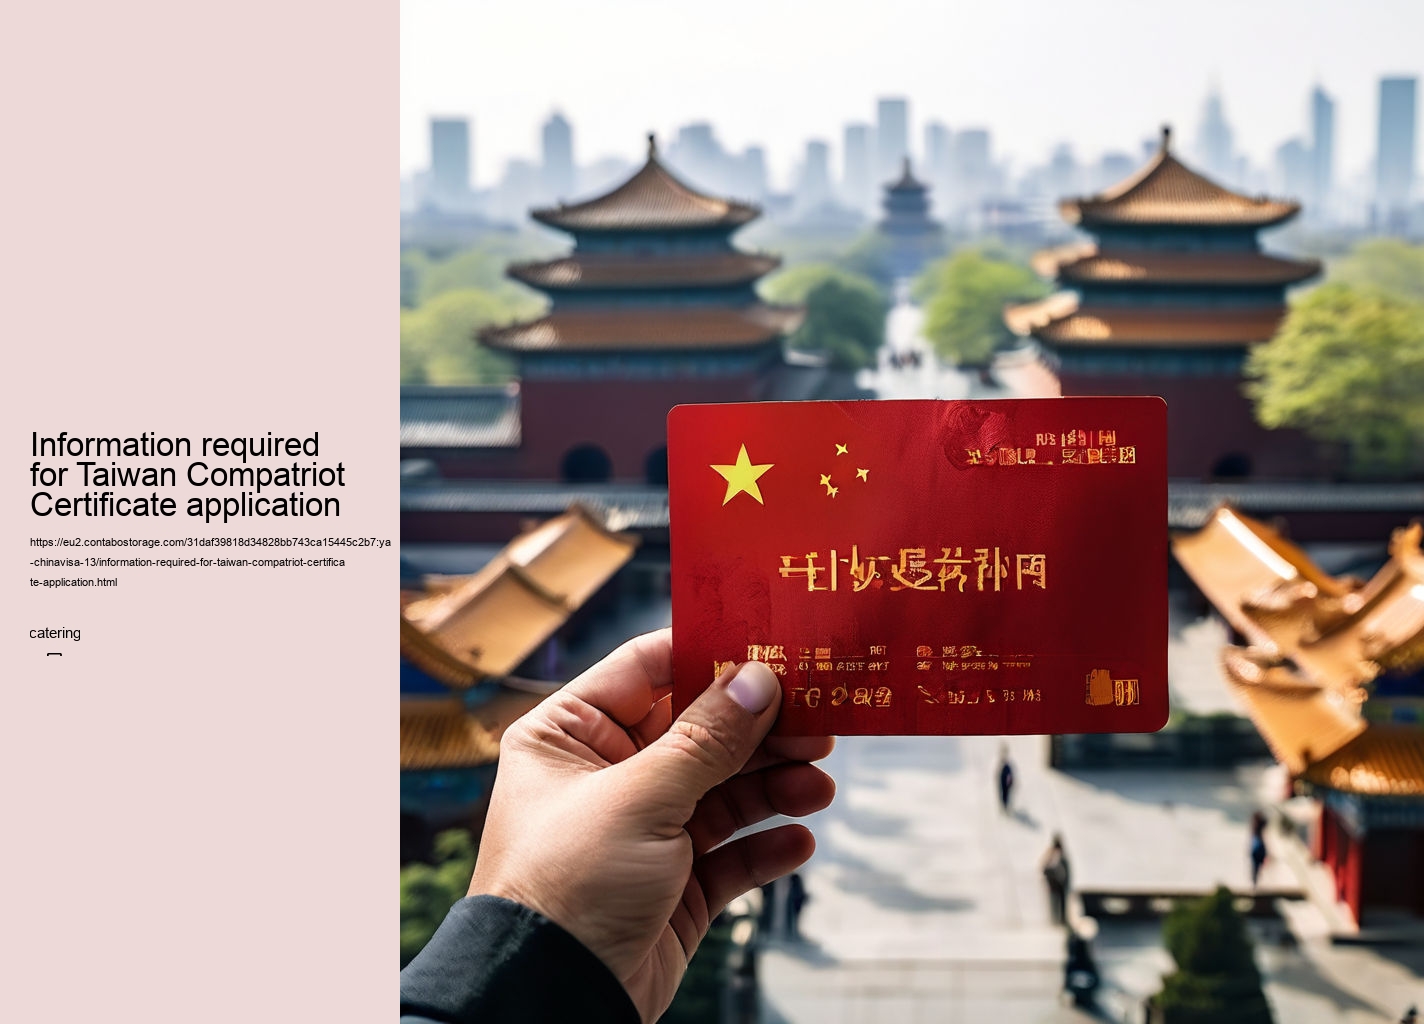 Information required for Taiwan Compatriot Certificate application